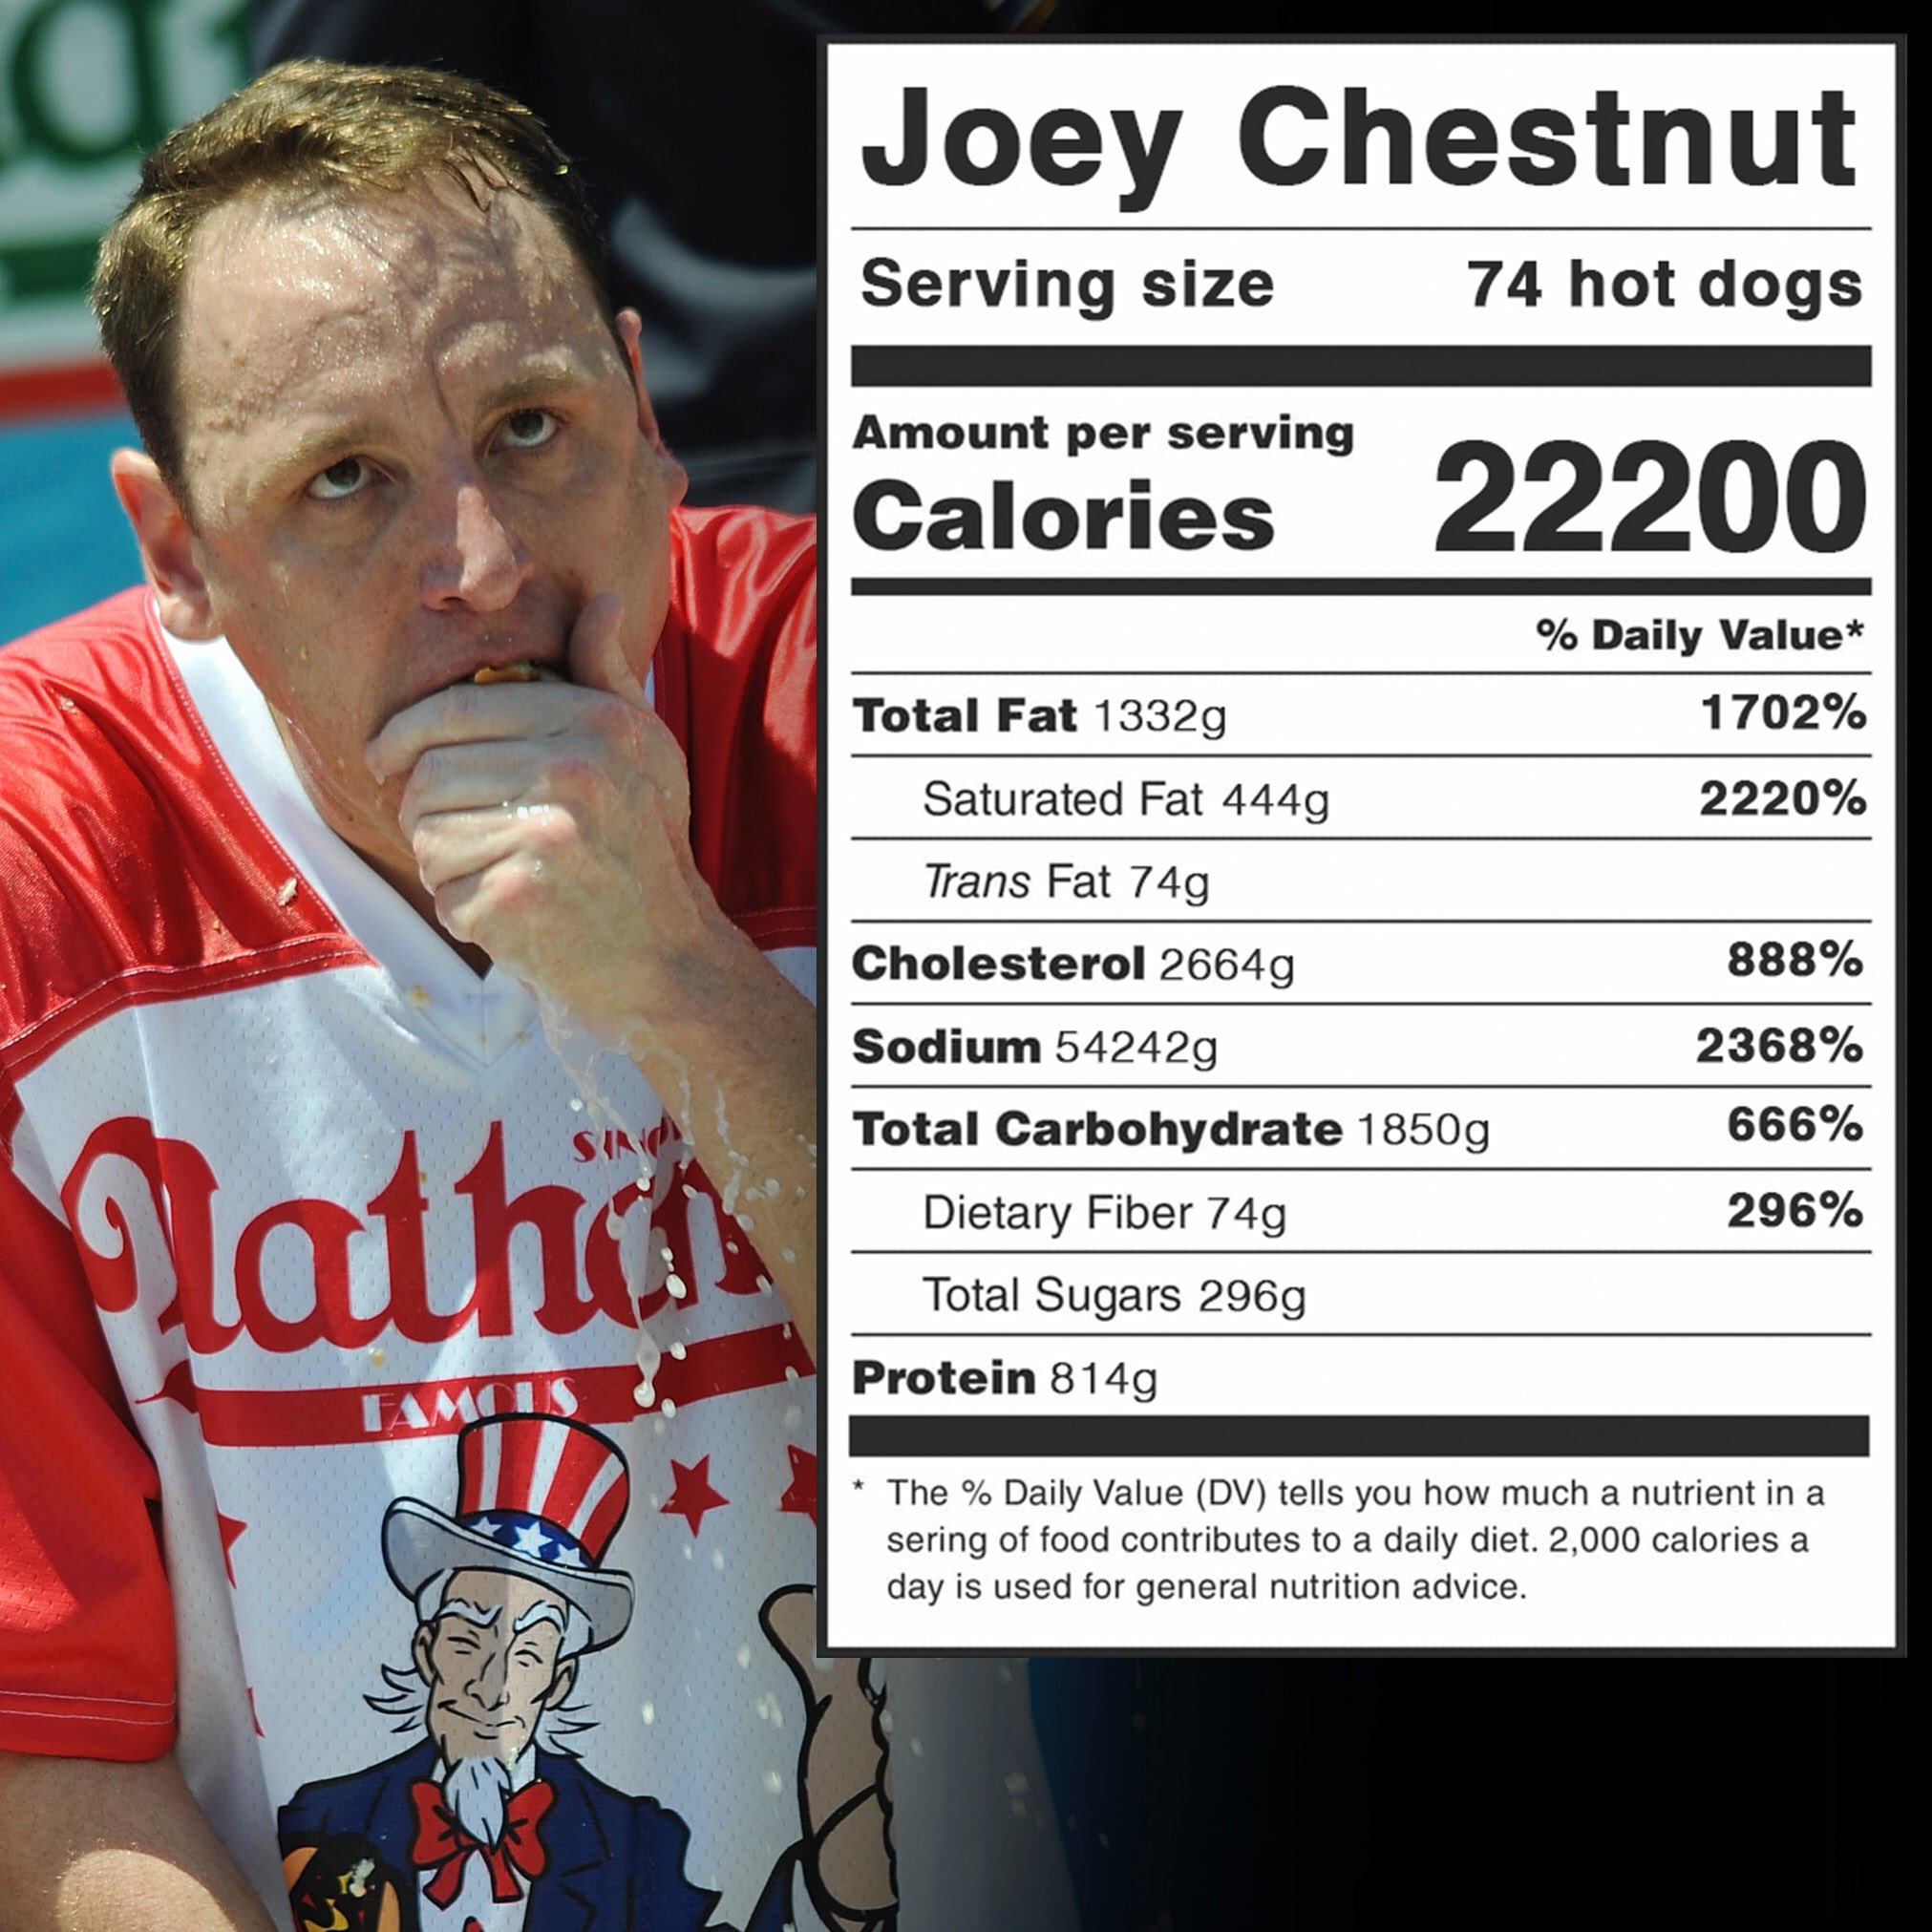 Darren Rovell on Twitter: "Nutrition Data on Joey Chestnut's record 74 hot  dogs and buns in 10 minutes. https://t.co/vsuhaHH0ah" / Twitter